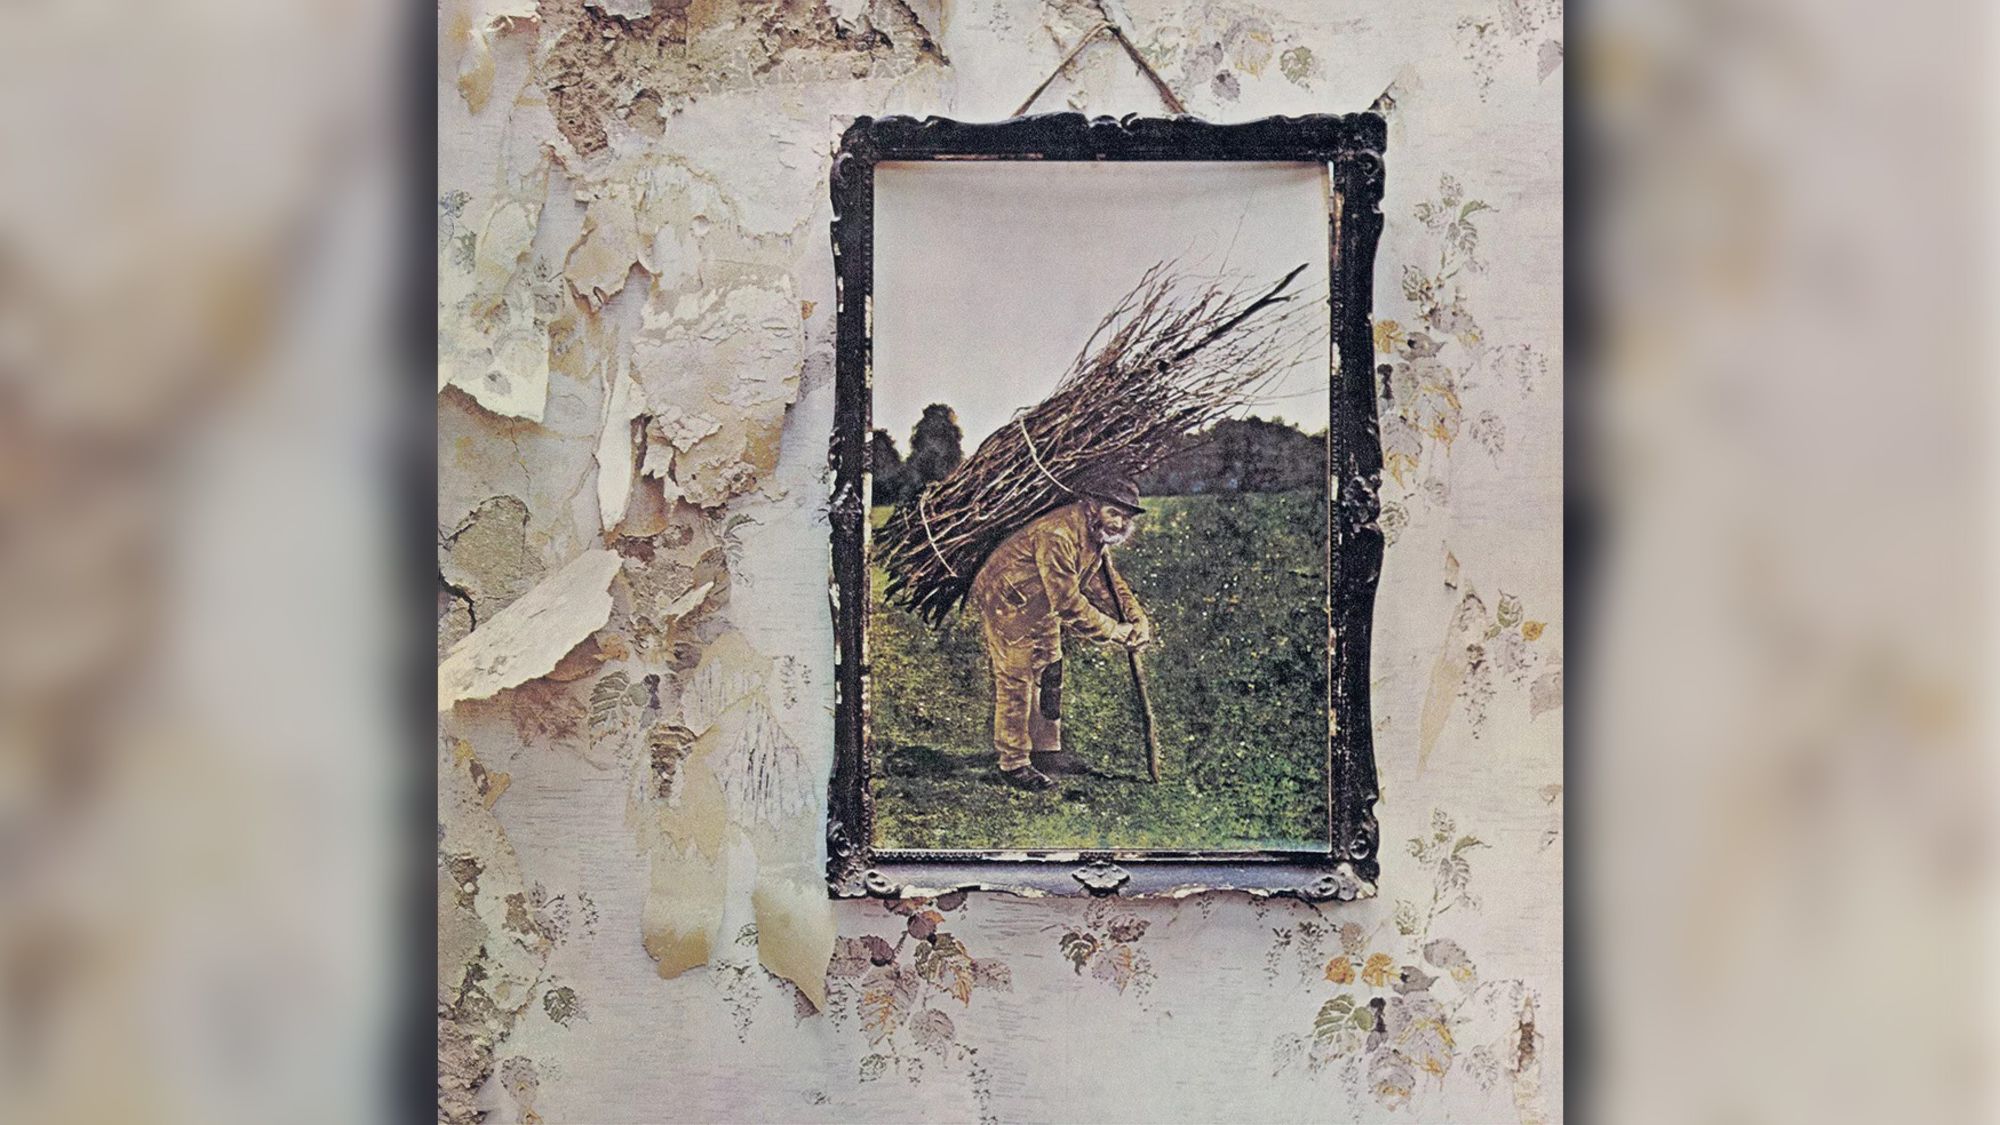 There are no words on the “Led Zeppelin IV” album cover, not even the band’s name. It only features a framed, colored version of a photograph of an elderly man.